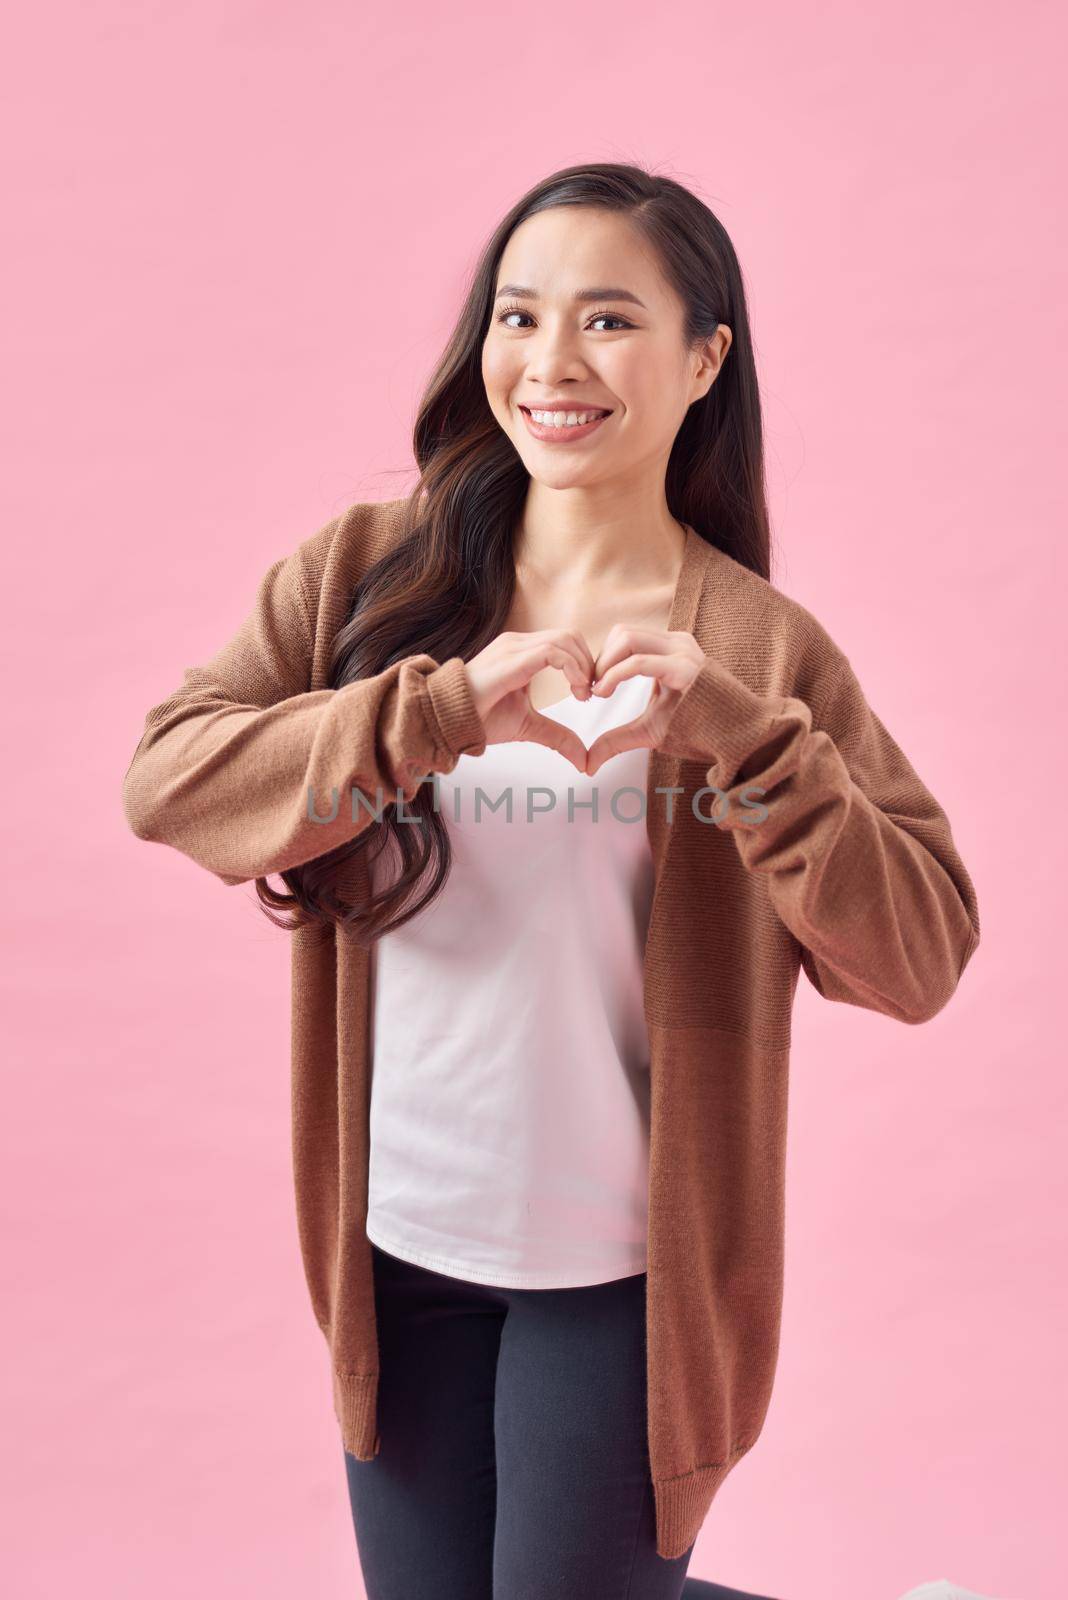 Happy woman make heart shape by her hands, closeup portrait on pink background.